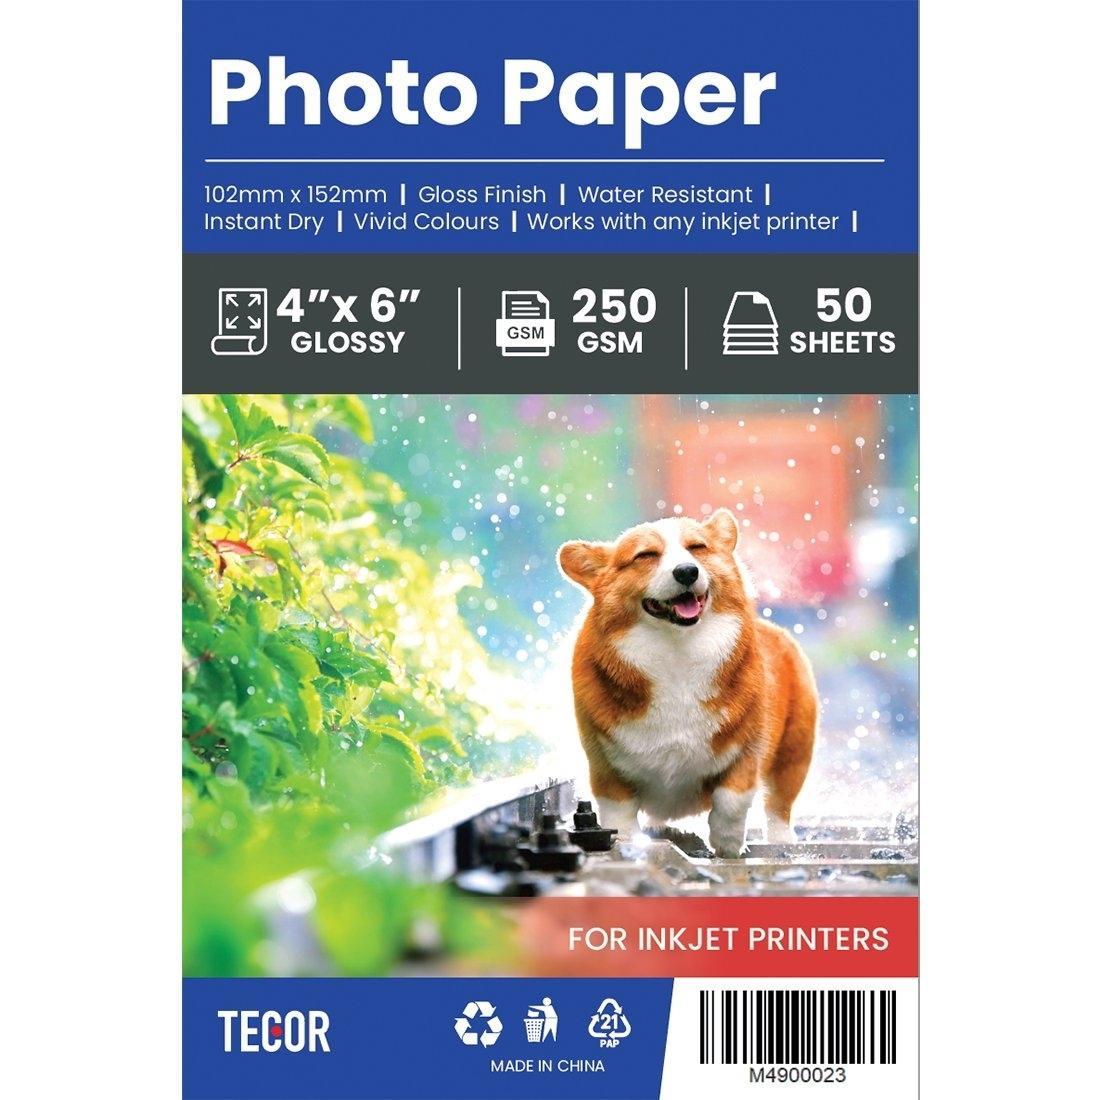 5 x Glossy Cast Coated Photo Paper 250GSM 4 x 6 inches for Inkjet Printers - 50 sheets per pack (250 sheets in total)